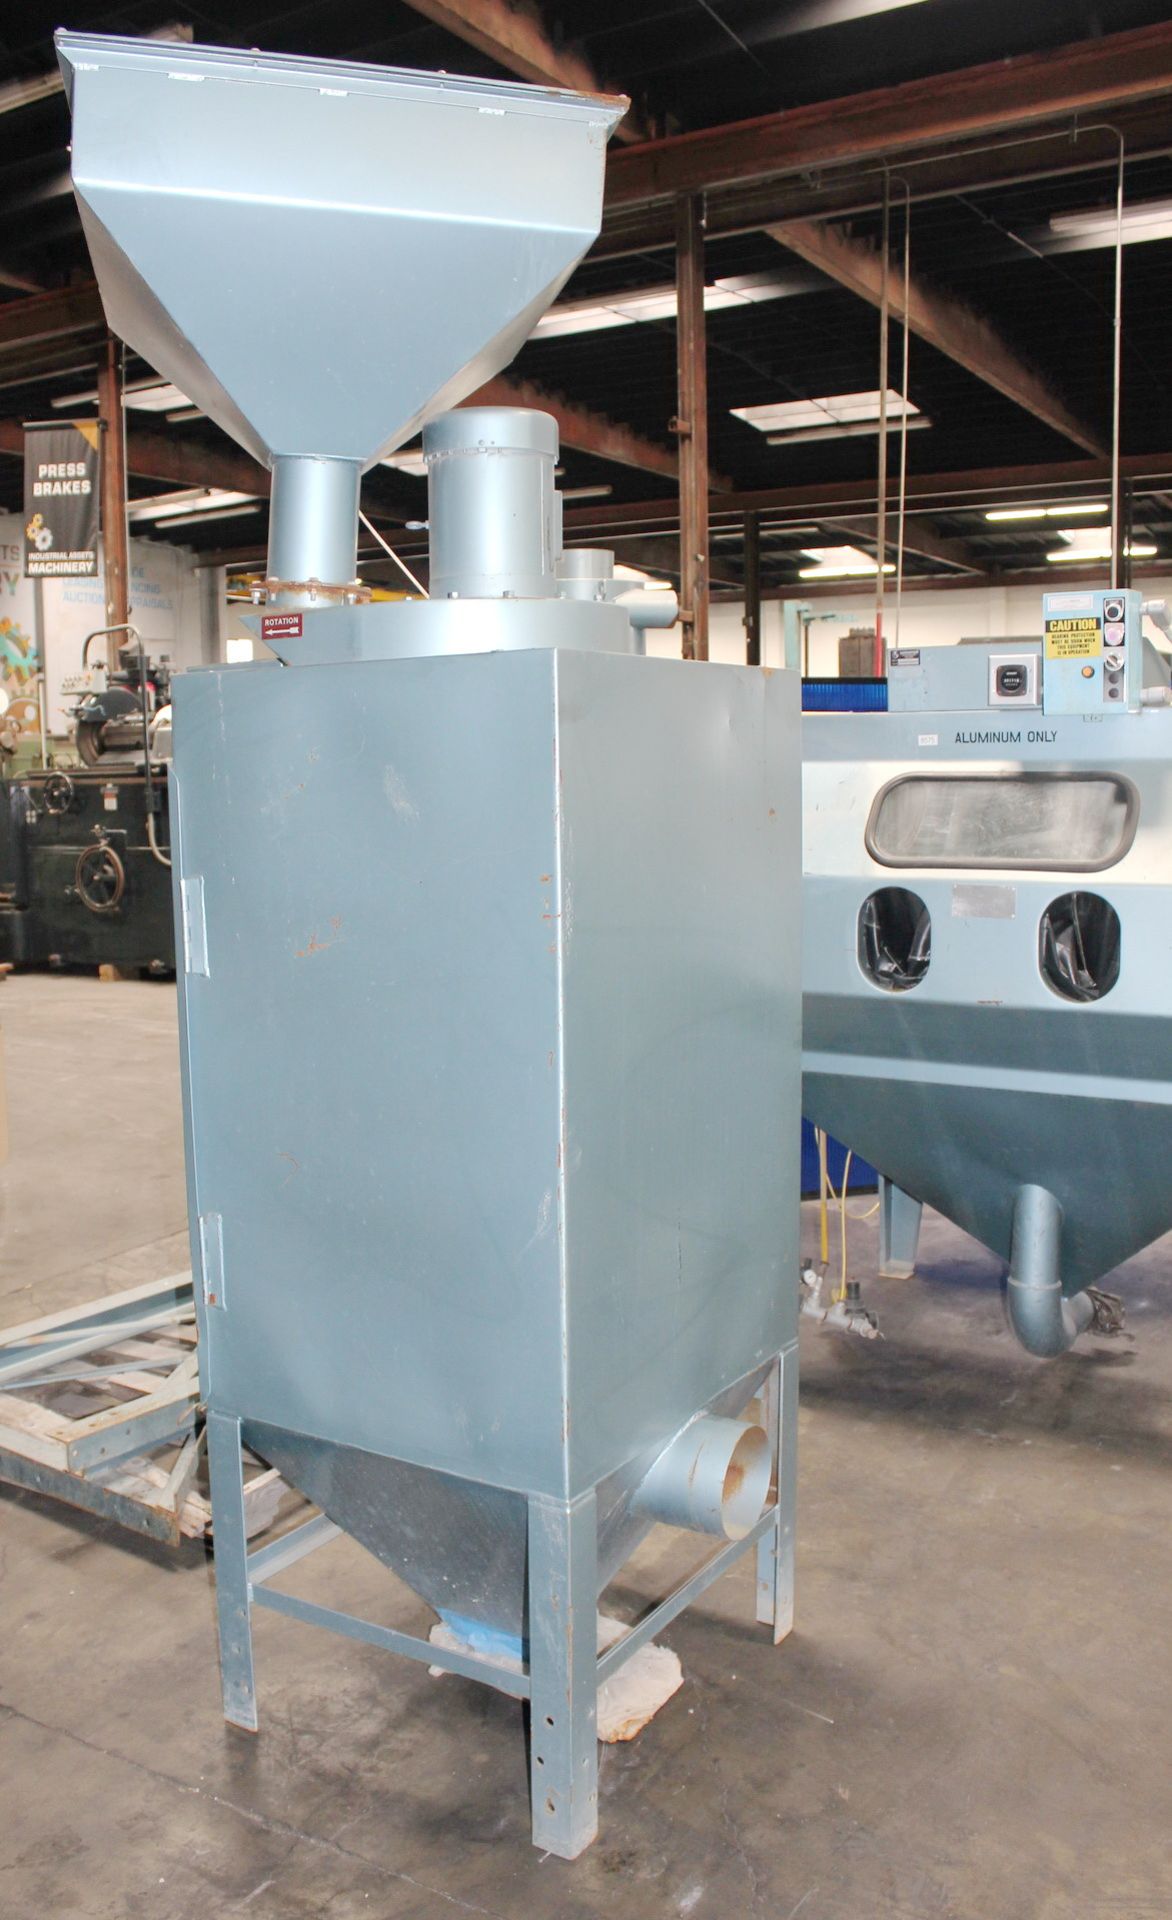 Universal Suction Type Blast Cabinet & Dust Collector | 60" x 48" x 36", Mdl: 60x48x36PDH-DC200, S/ - Image 15 of 20